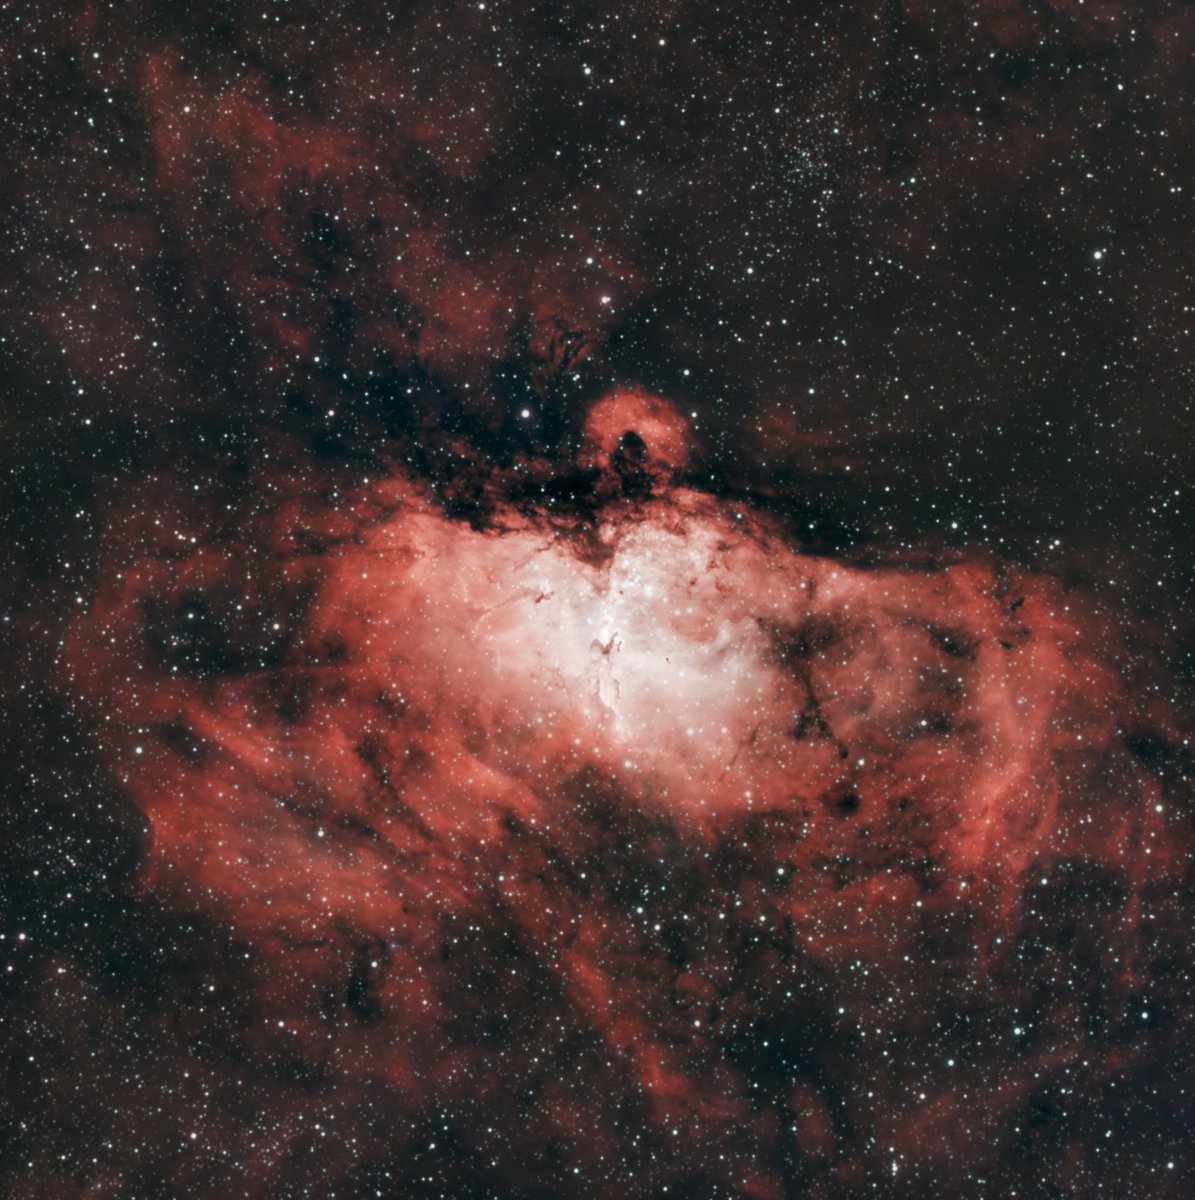 M16, The Eagle Nebula, shot over the last 3 nights, 7.5hrs total.... Tough capture from my latitude, but just had to see the Pillars for myself!! 👀🔭👍 #Astrophotography